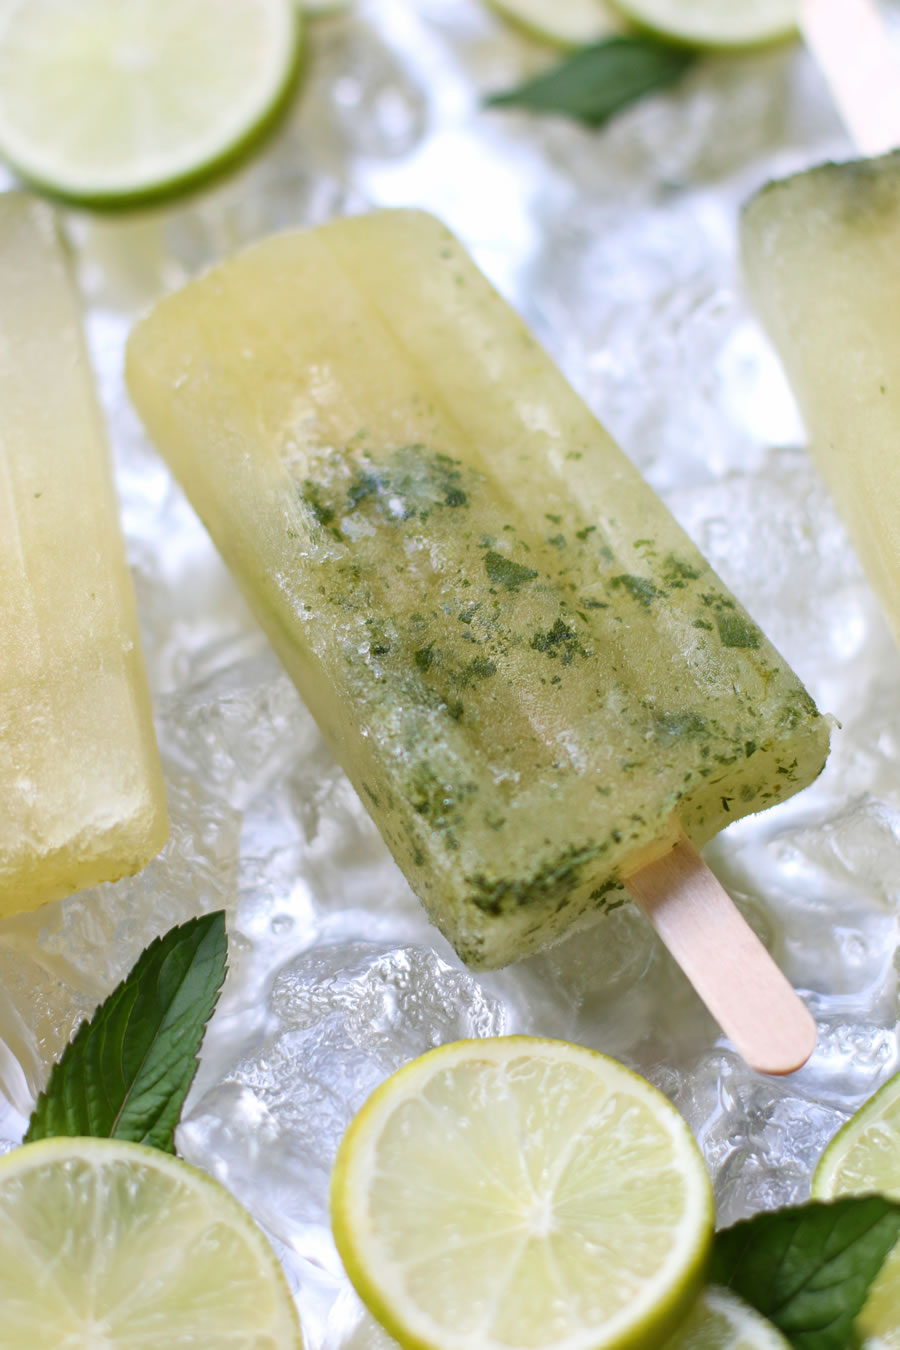 DIY Recipe For Manuka Honey, Mint And Lime Ice Pops